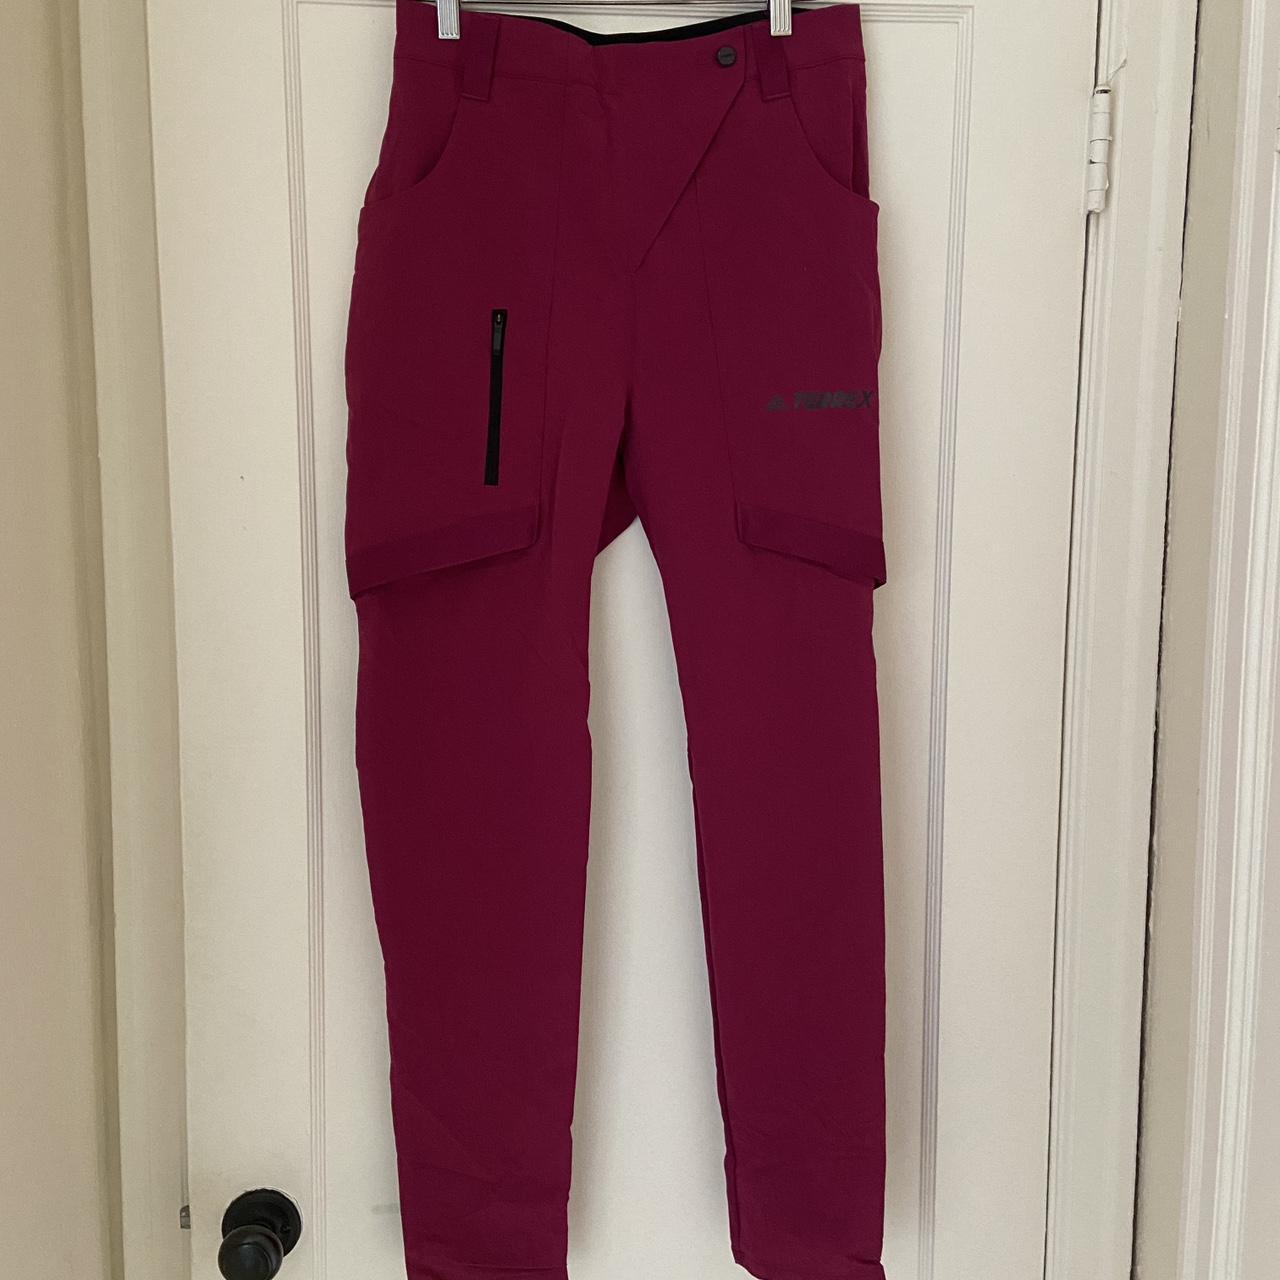 Adidas Women's Pink Trousers